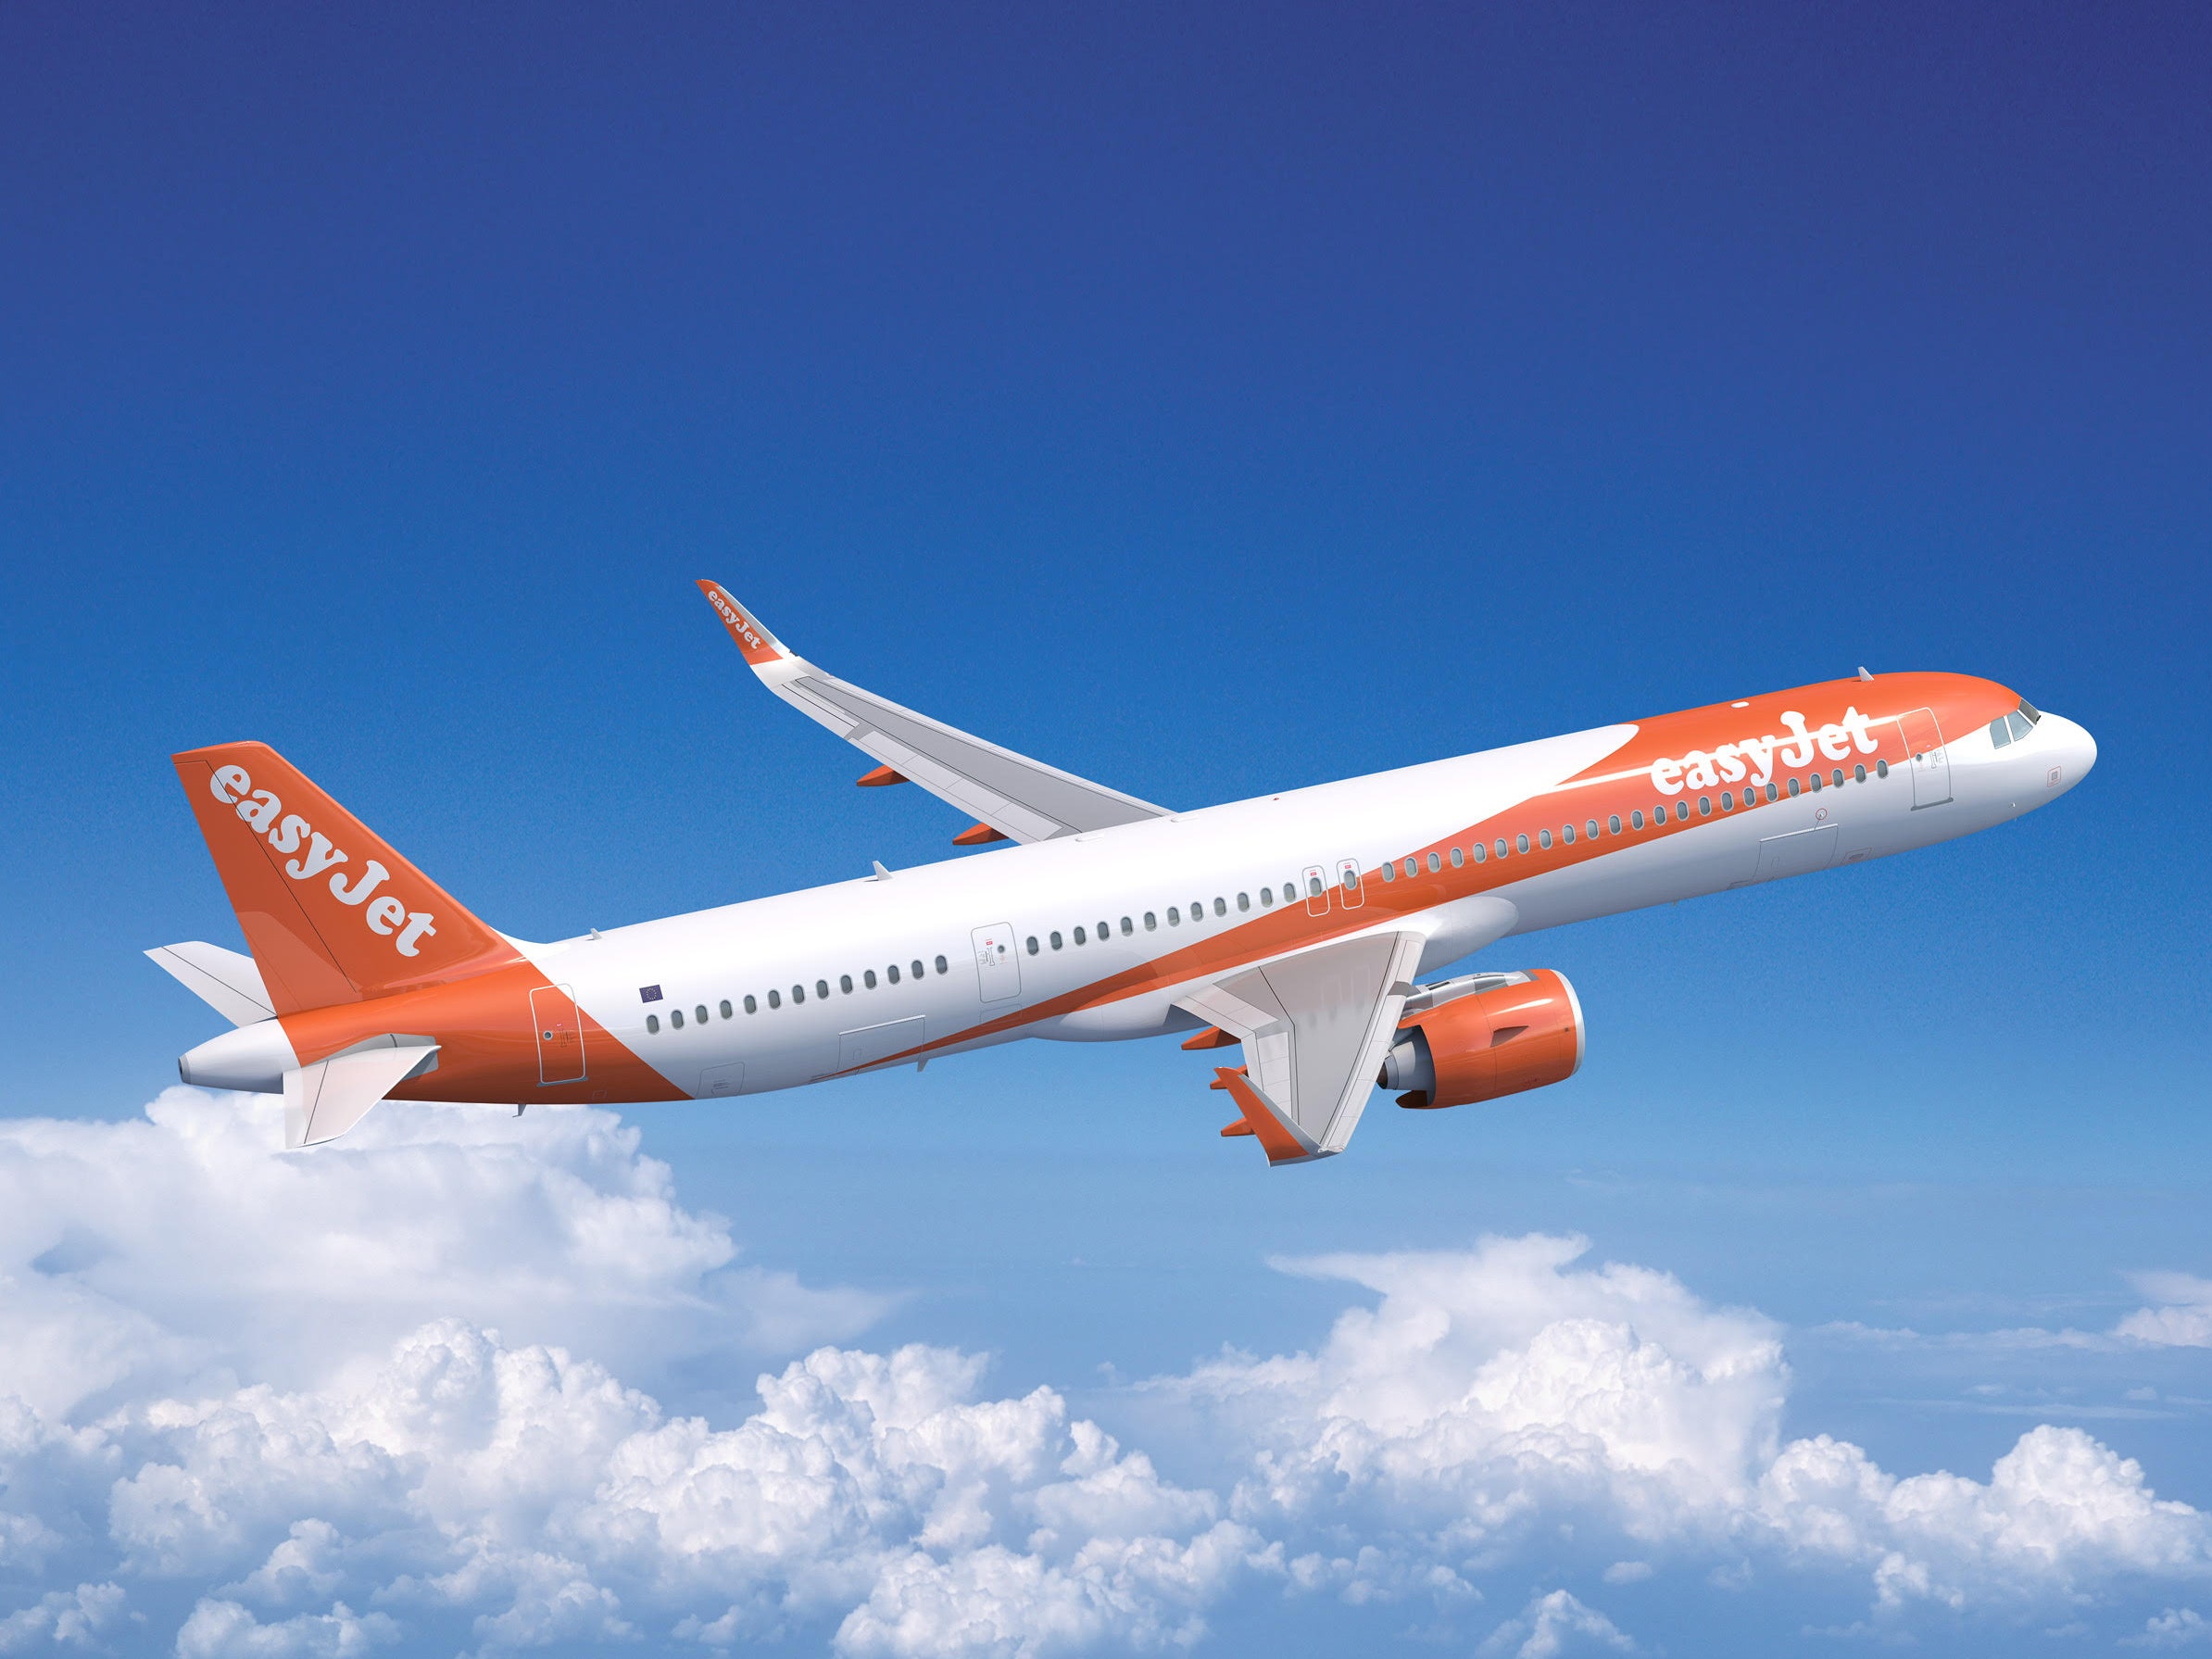 Easyjet cabin crew in Spain reach pay deal and call off strikes